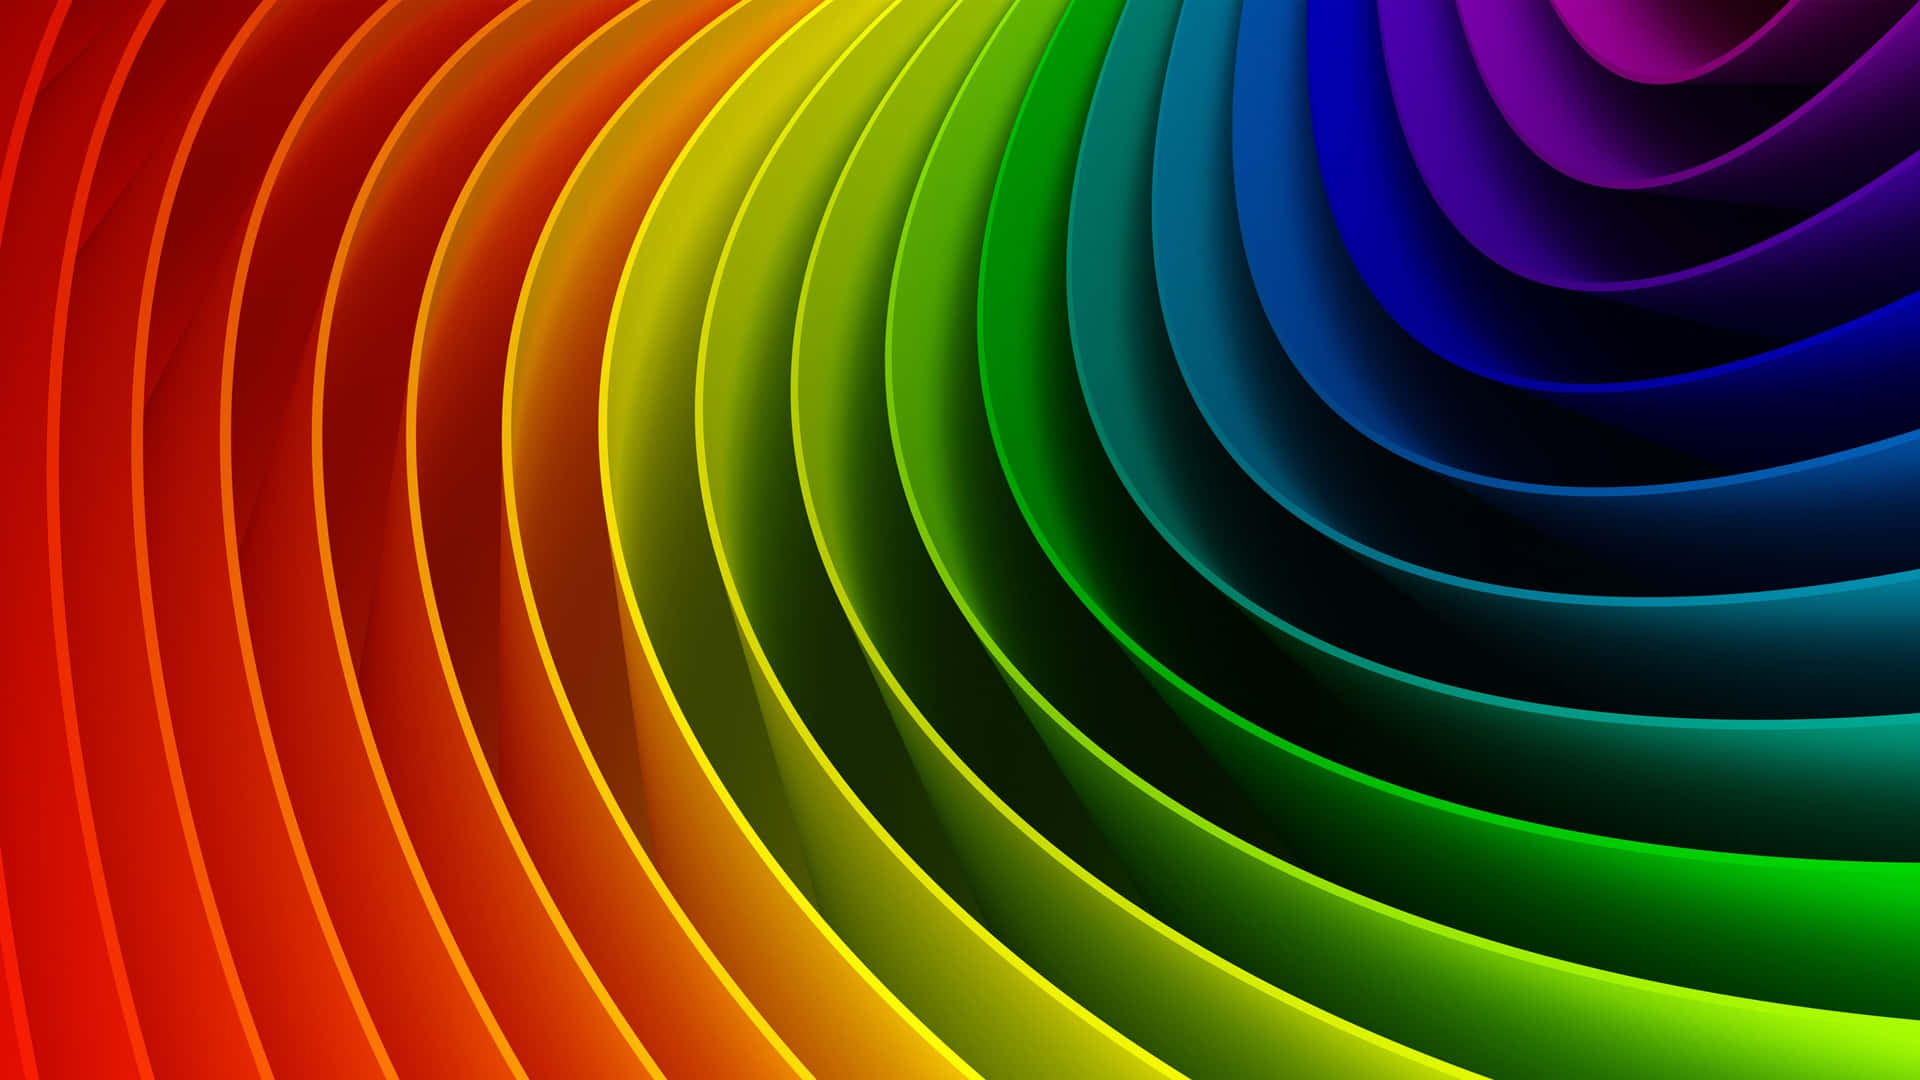 A Colorful Rainbow Background With A Rainbow Of Colors Wallpaper